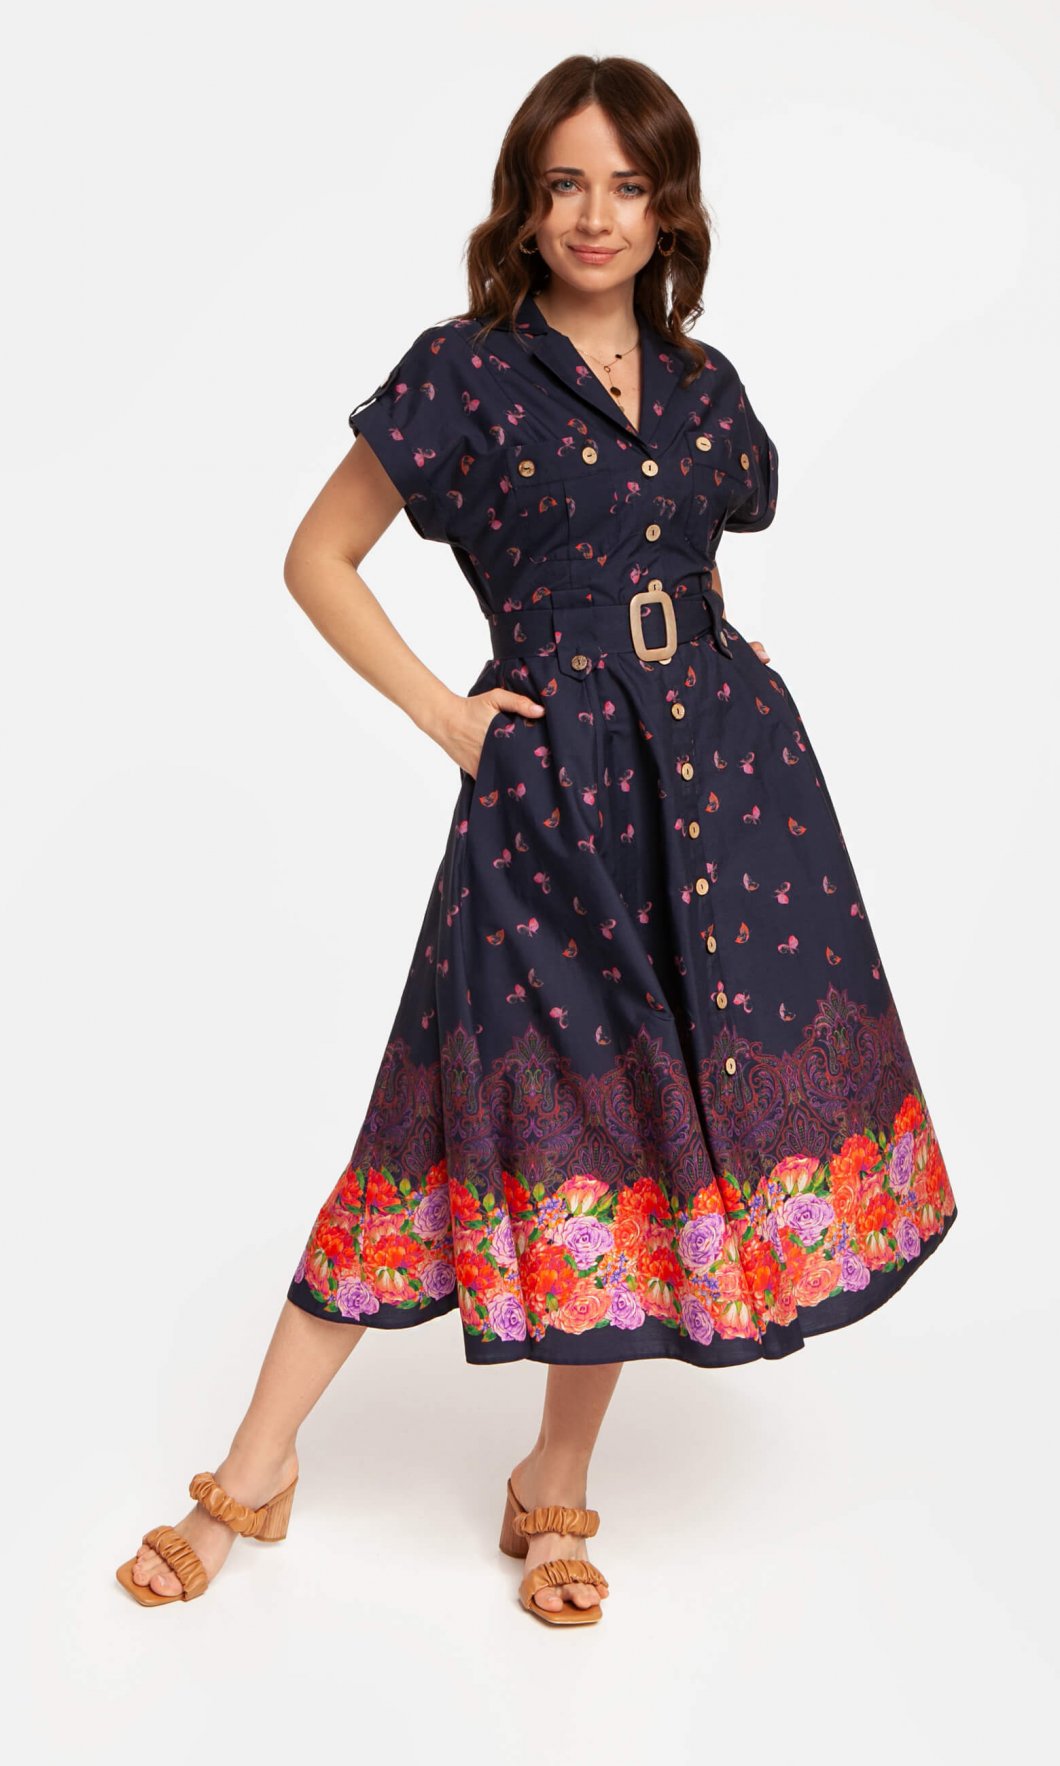 Carla dress - navy blue and pink